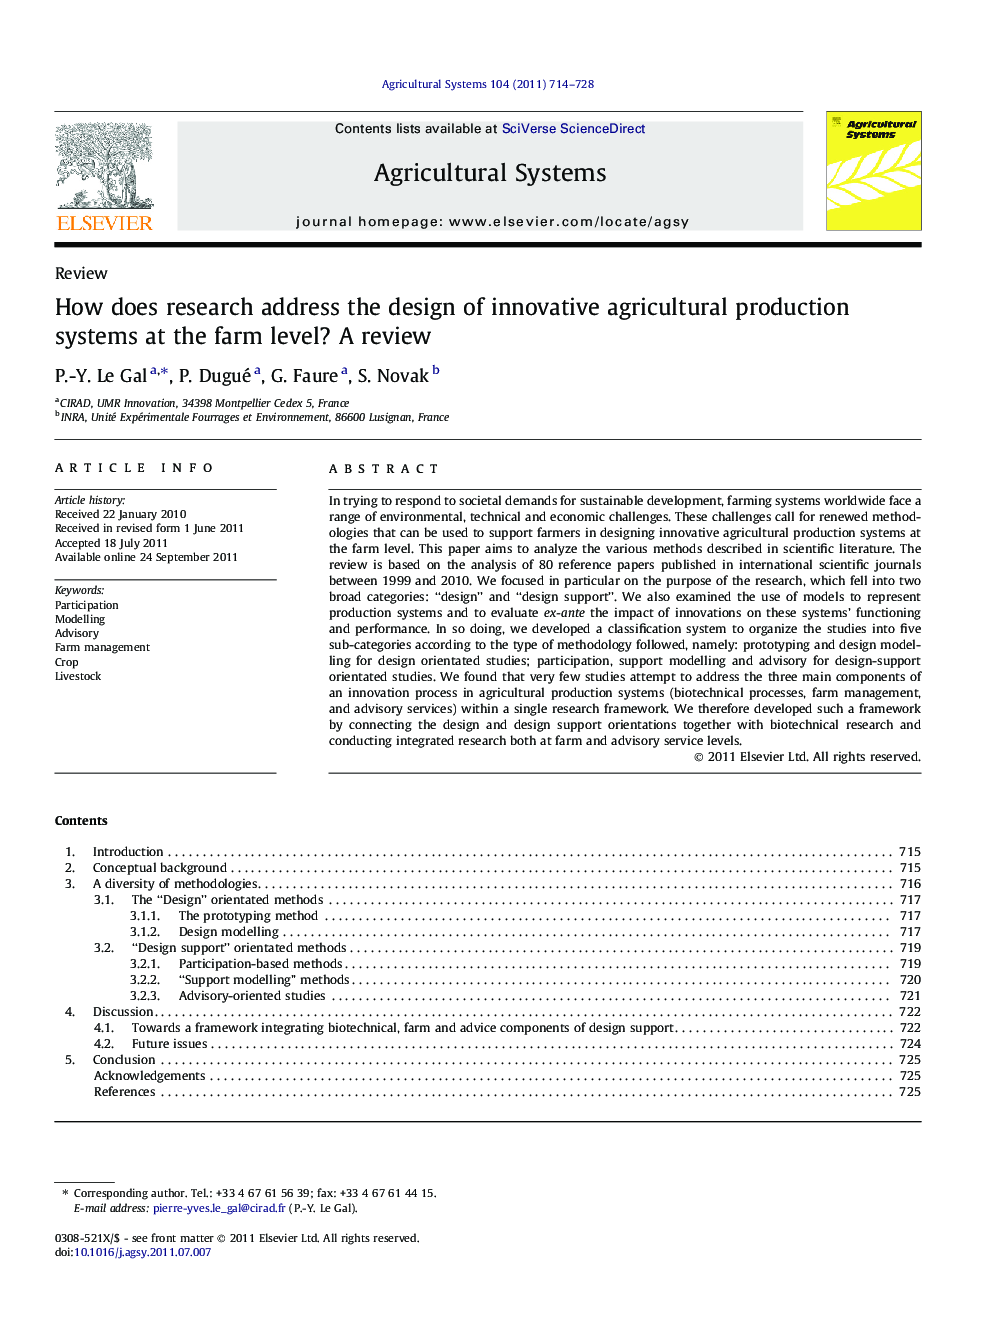 How does research address the design of innovative agricultural production systems at the farm level? A review